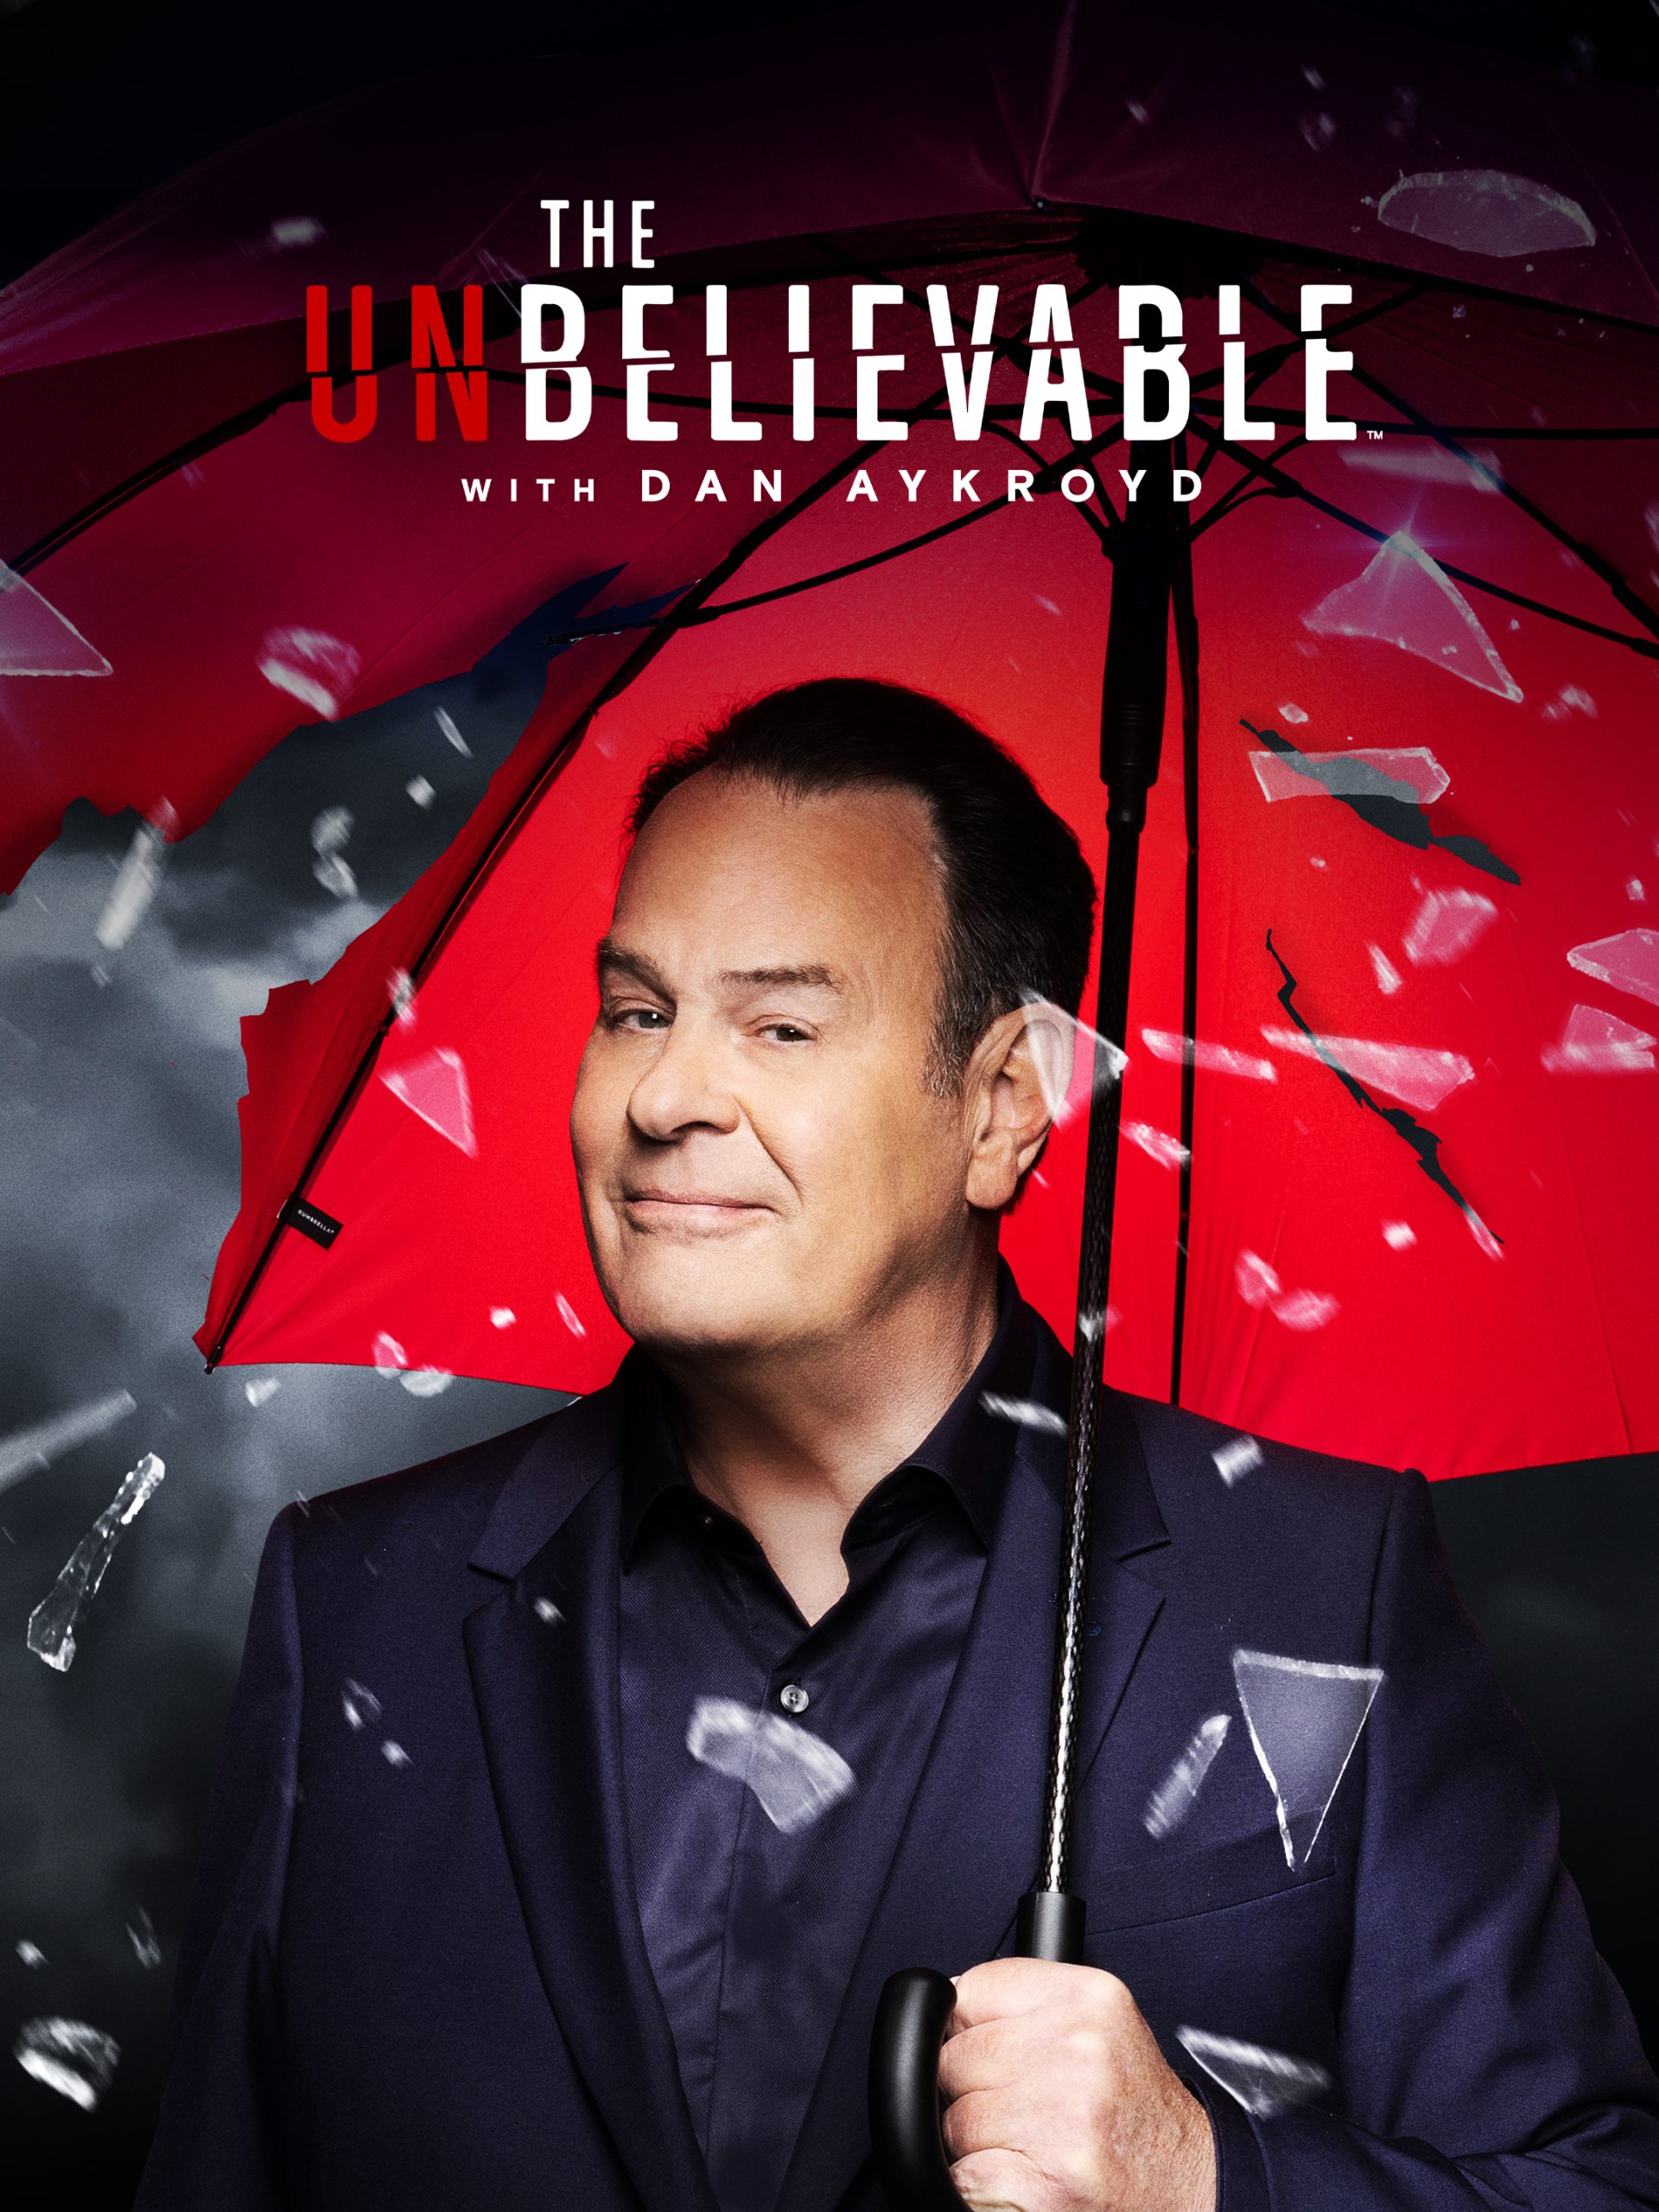 The UnBelievable With Dan Aykroyd "Outlandish Inventions" S1E5 January